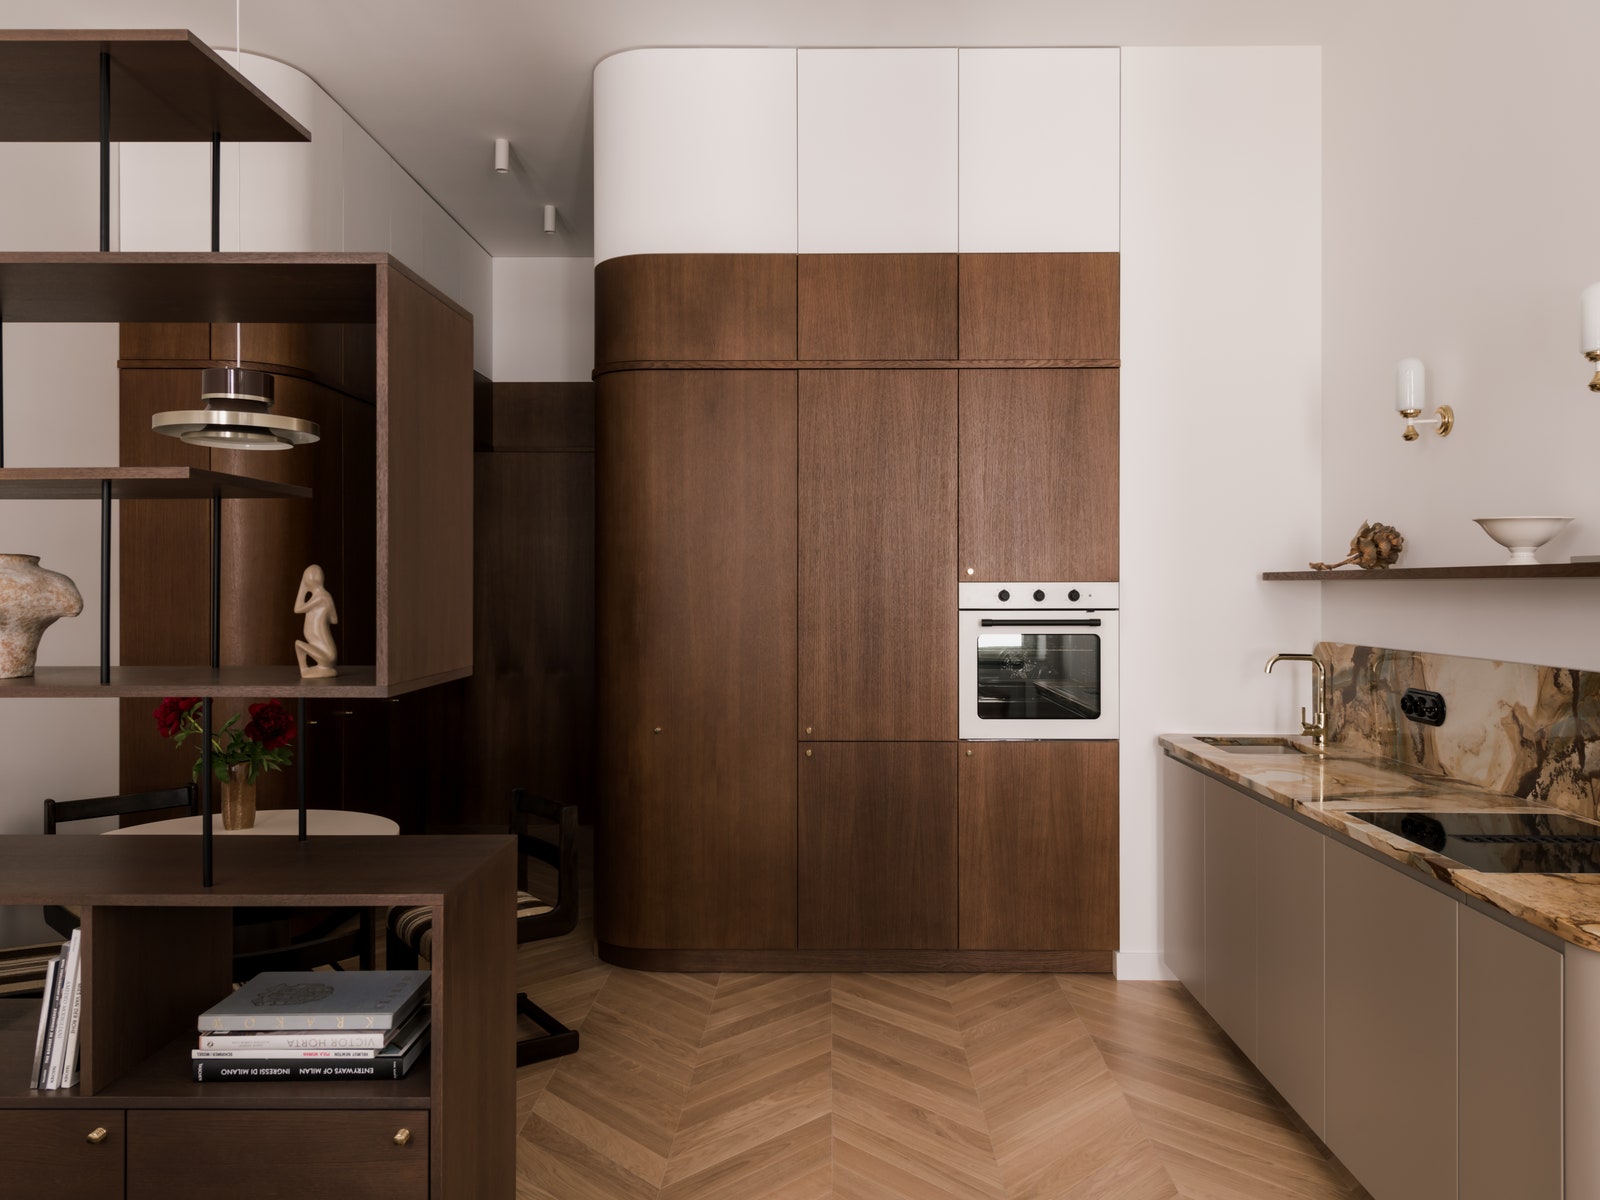 This 350-Square-Foot Apartment Takes Cues From Midcentury Hotel Rooms